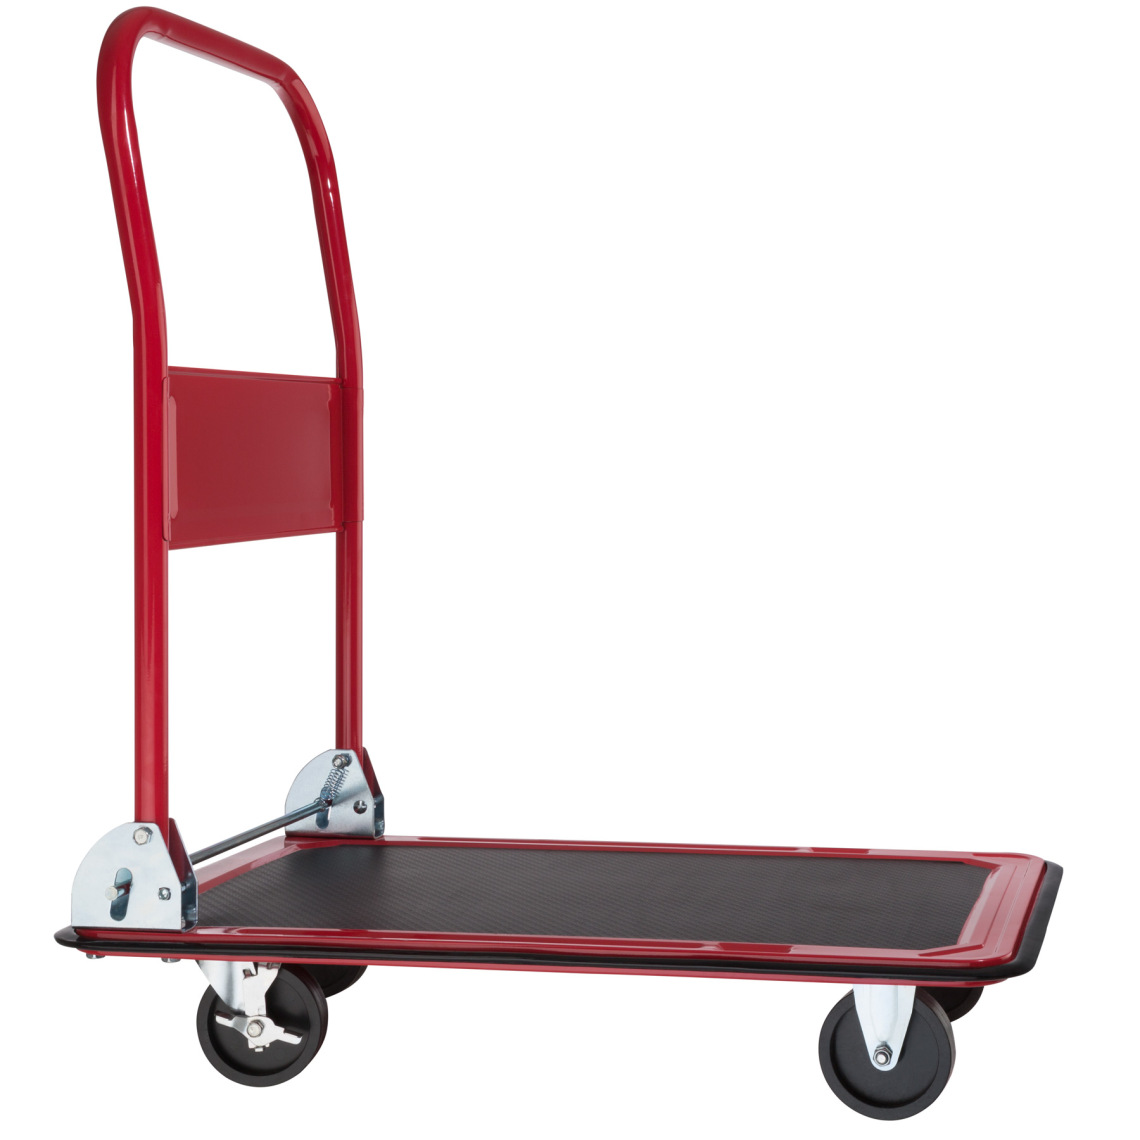 Tectake - Chariot - rouge - 150 kg - Diable, chariot